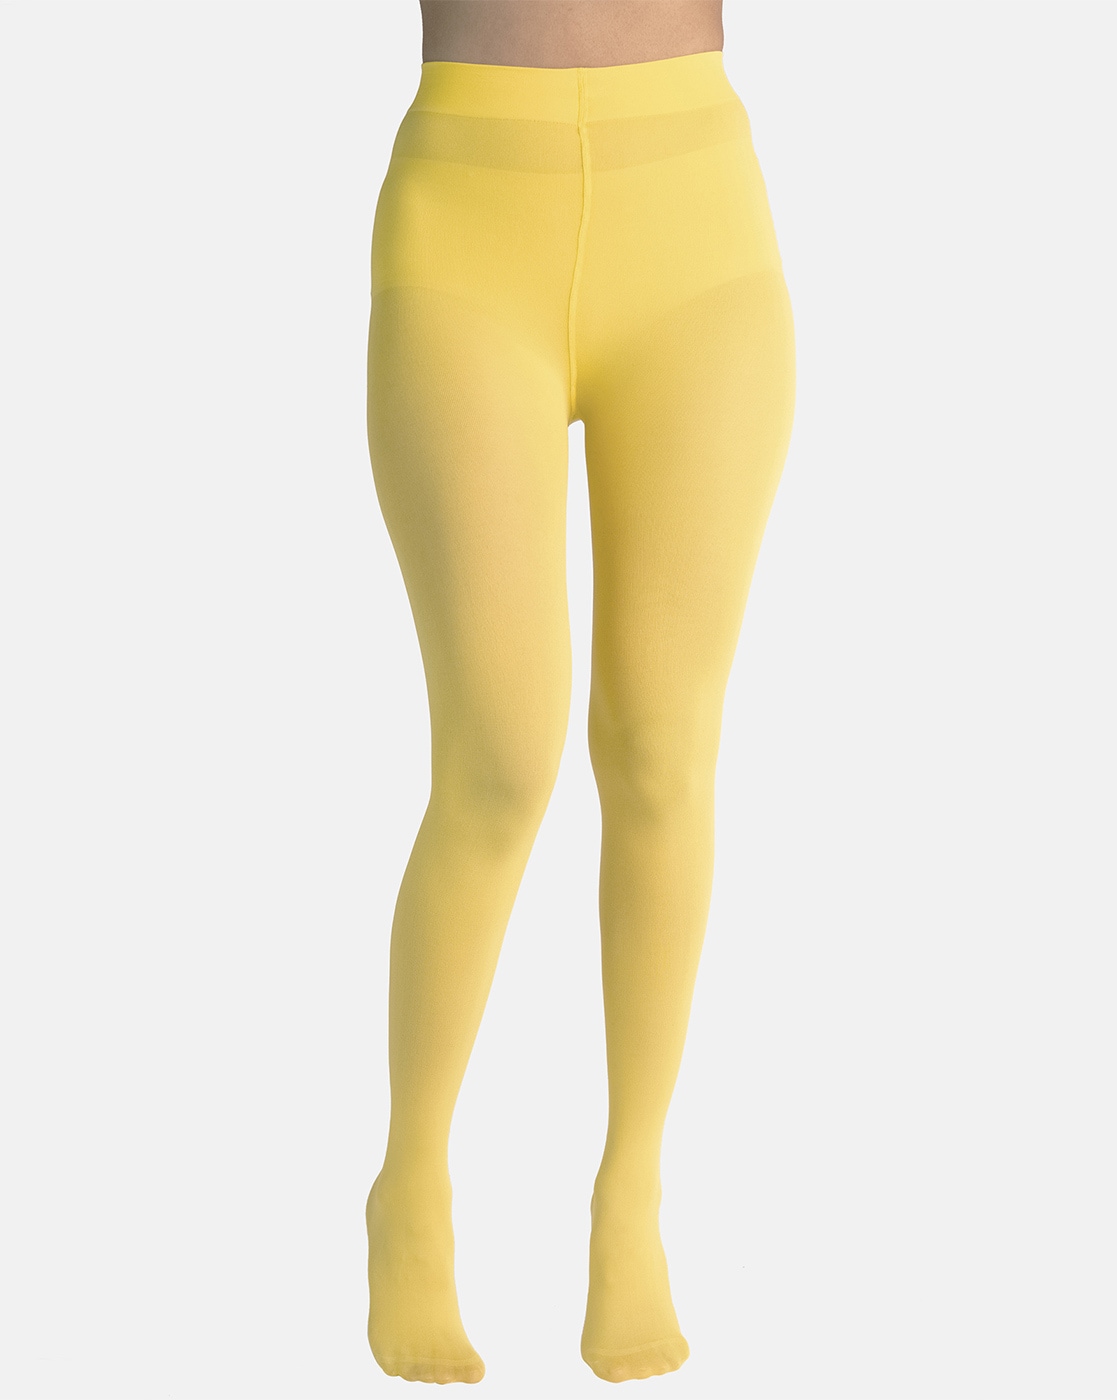 Buy Yellow Footless Tights for Women Ankle Length Pantyhose Plus Size  Available Online in India 